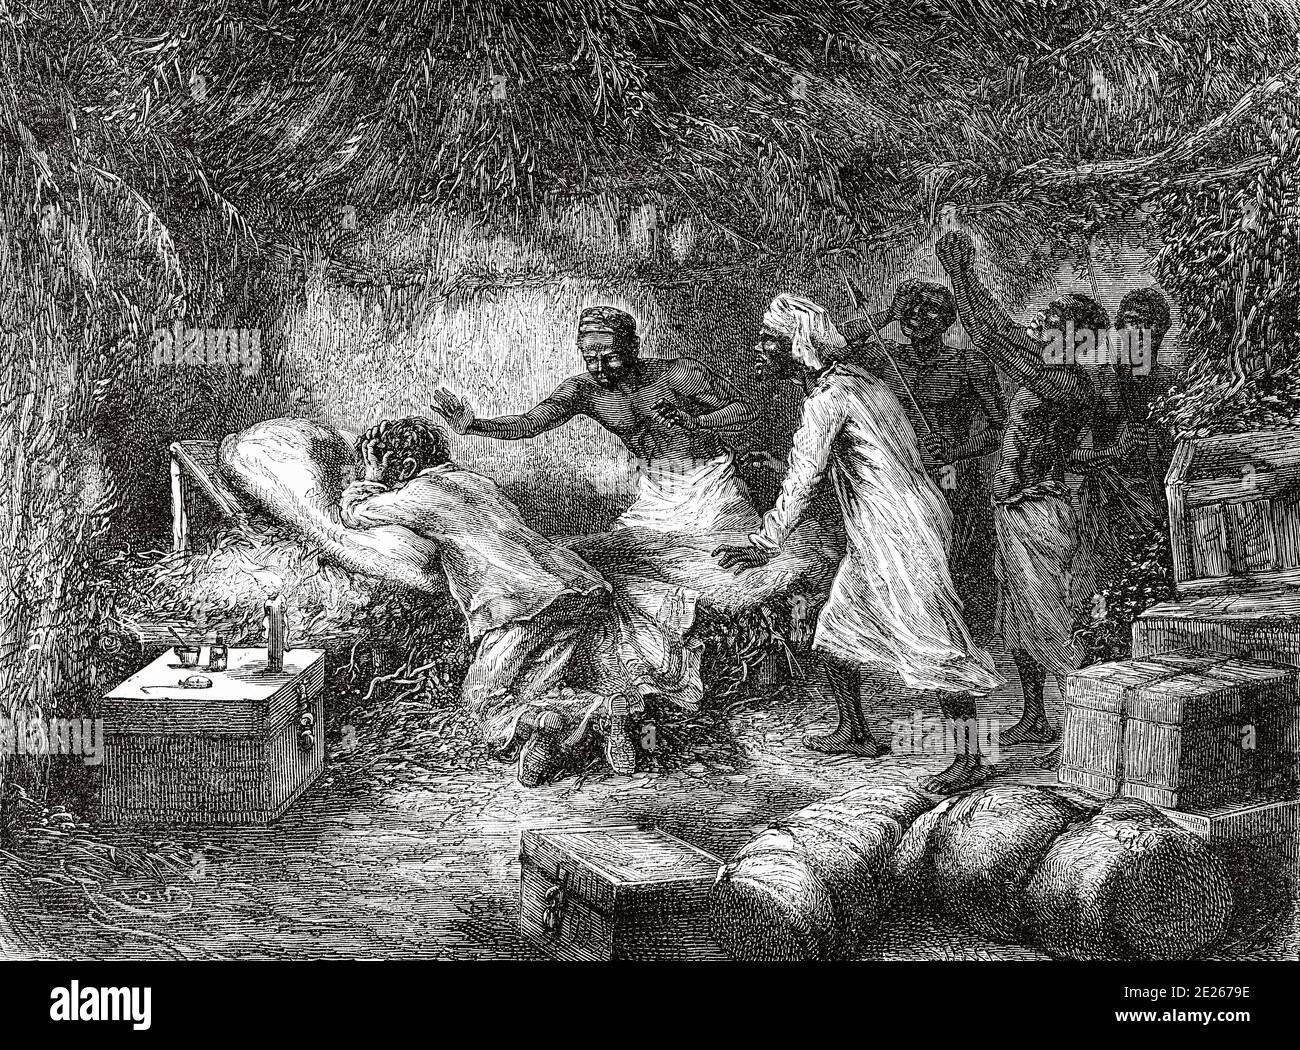 Death of Dr David Livingstone in the village of Tchitammbo, Africa in 1873. The Last Journals of David Livingstone  Scottish missionary and explorer, 1866-1873. Old engraving El Mundo en la Mano 1878 Stock Photo